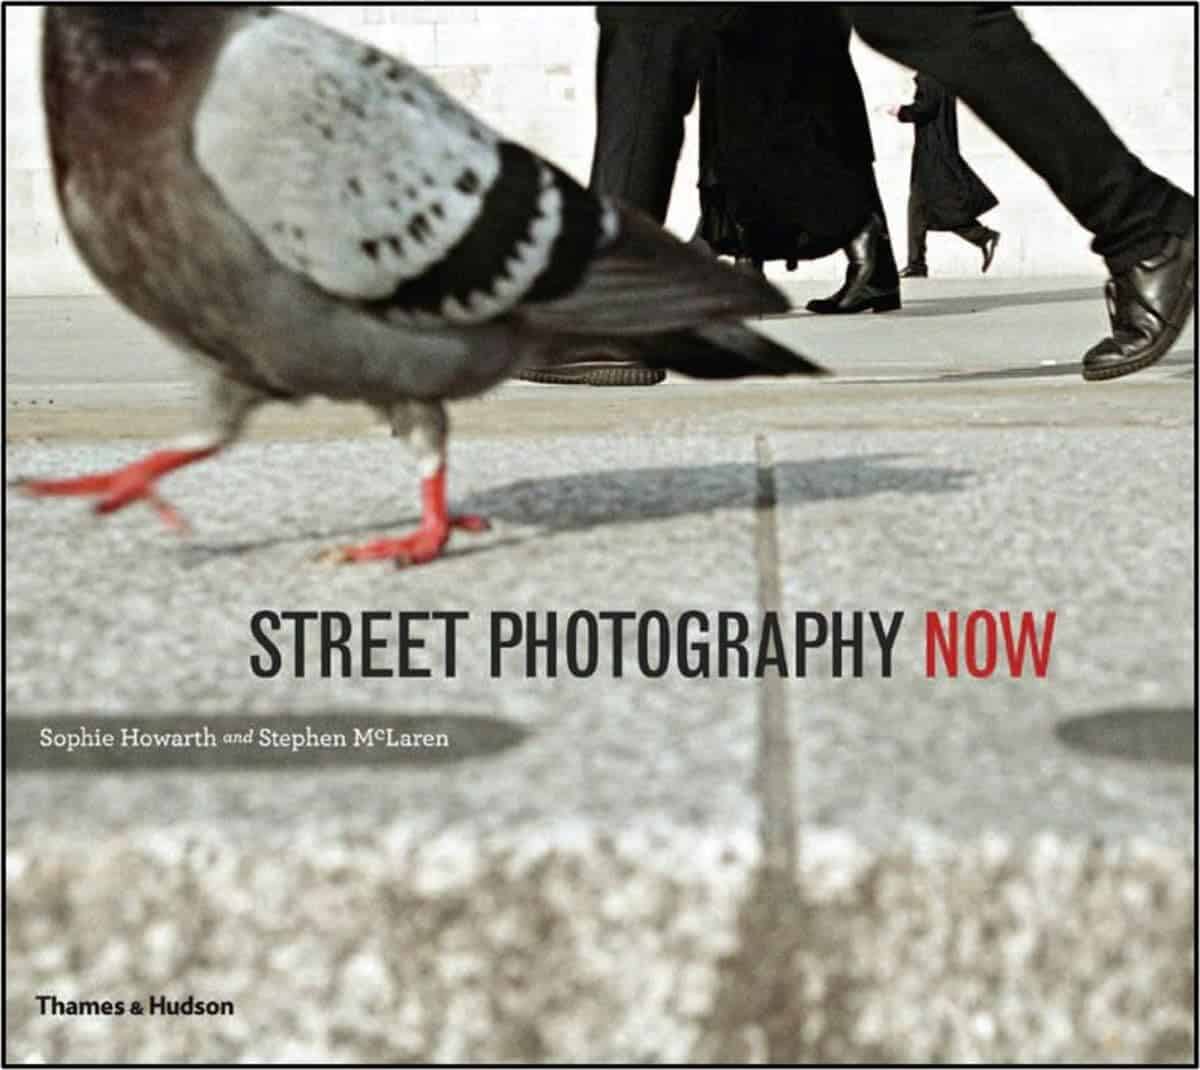 Street Photography Now by Sophie Howarth and Stephen McLaren